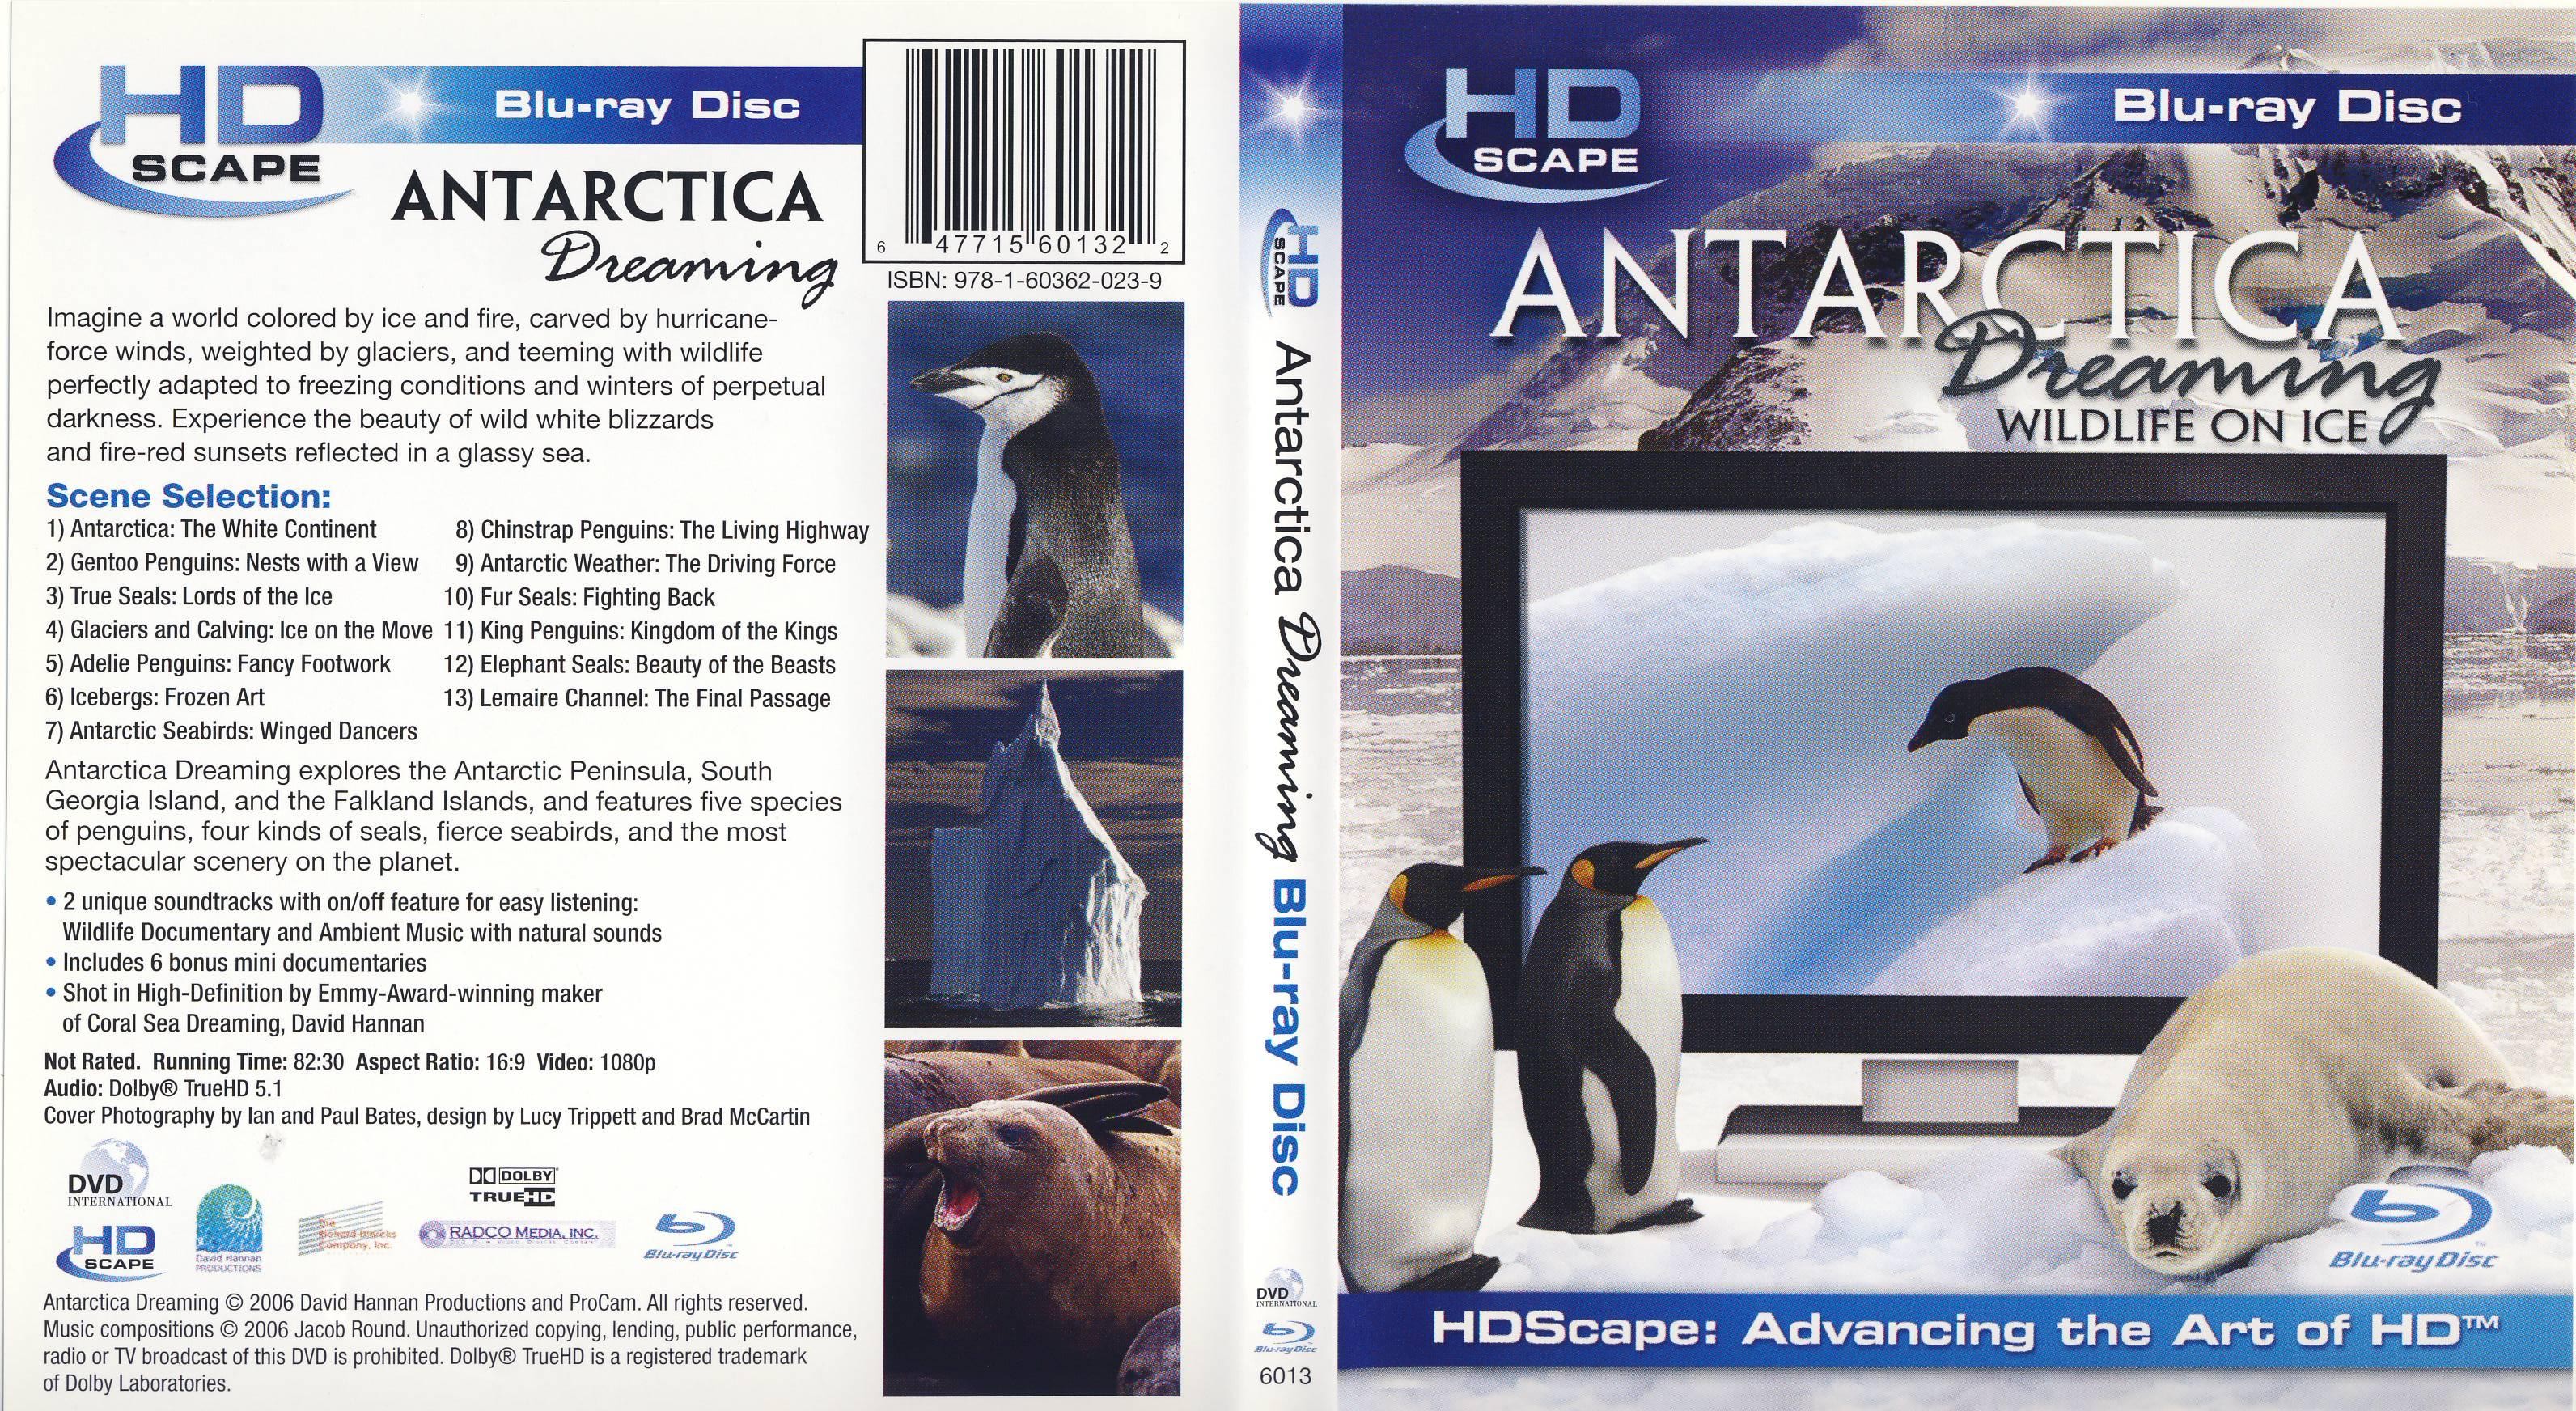 Jaquette DVD Antarctica Dreaming Wildlife On Ice Zone 1 (BLU-RAY)